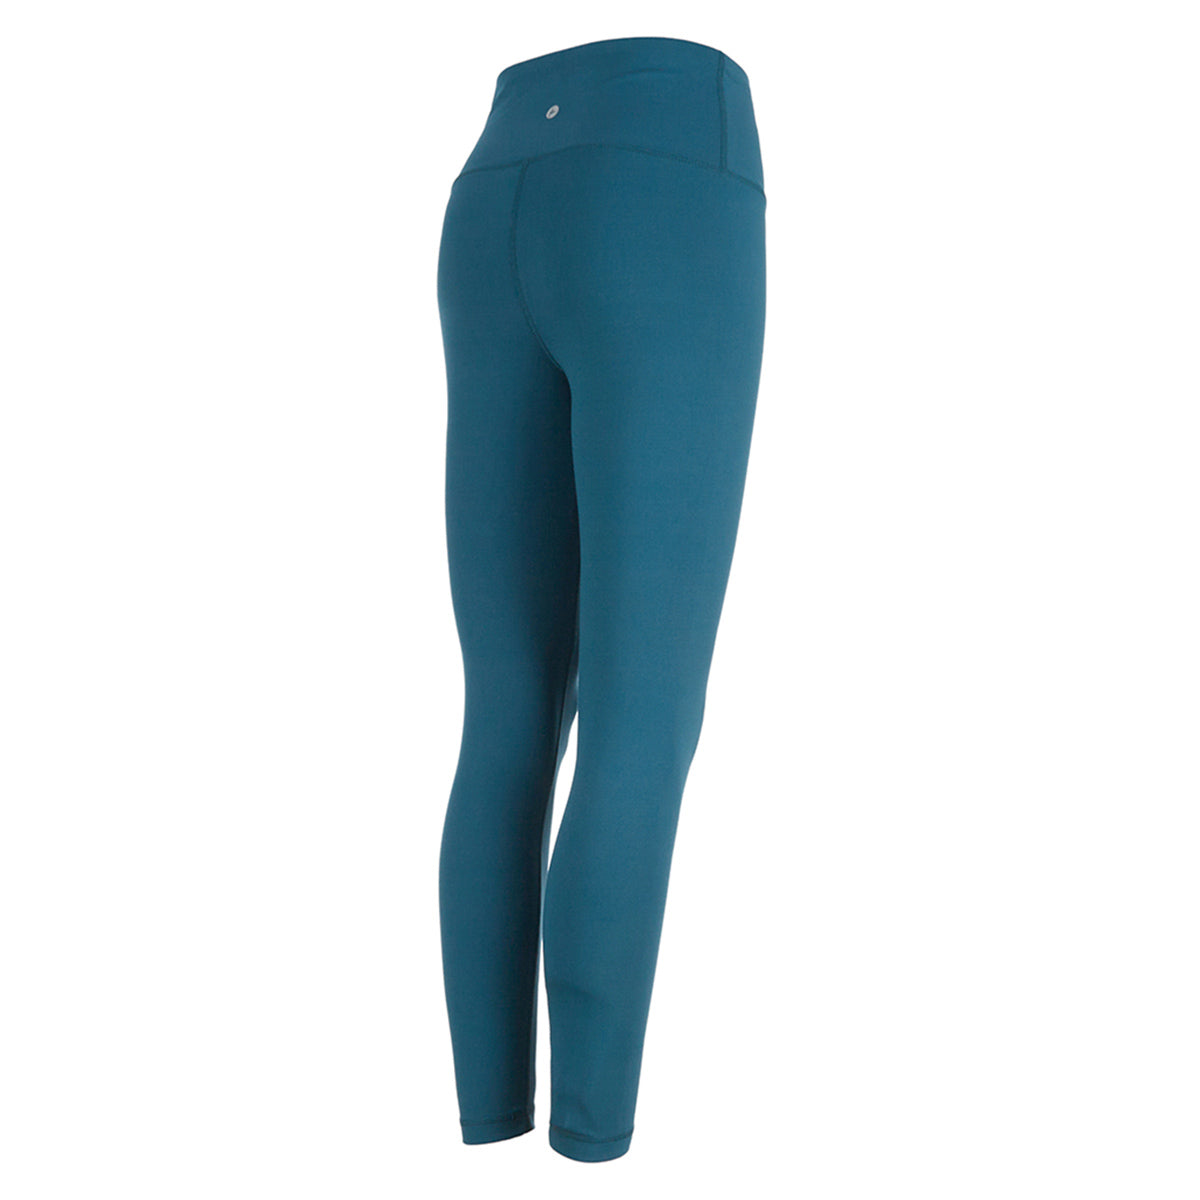 90 degree reflex yoga pants, 90 degree reflex yoga pants Suppliers and  Manufacturers at